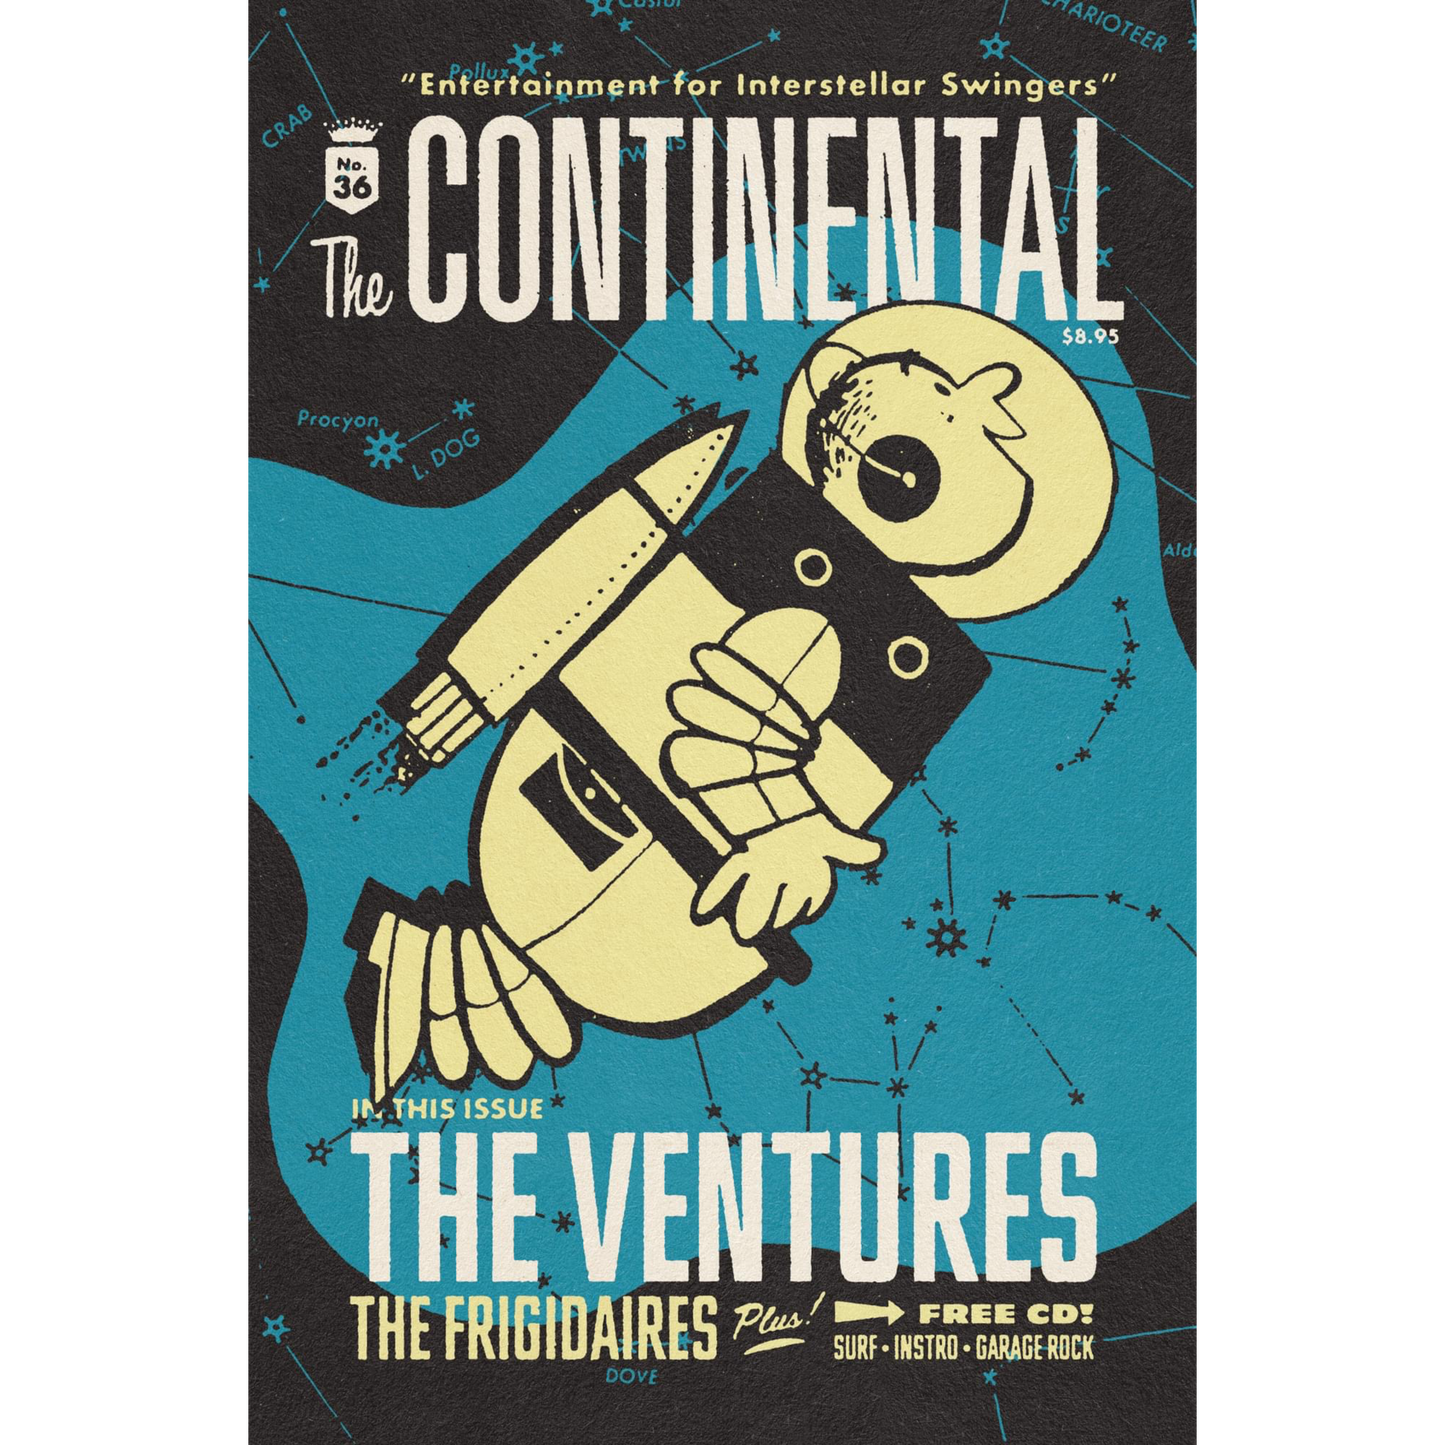 The Continental Magazine #36 ft. The Ventures